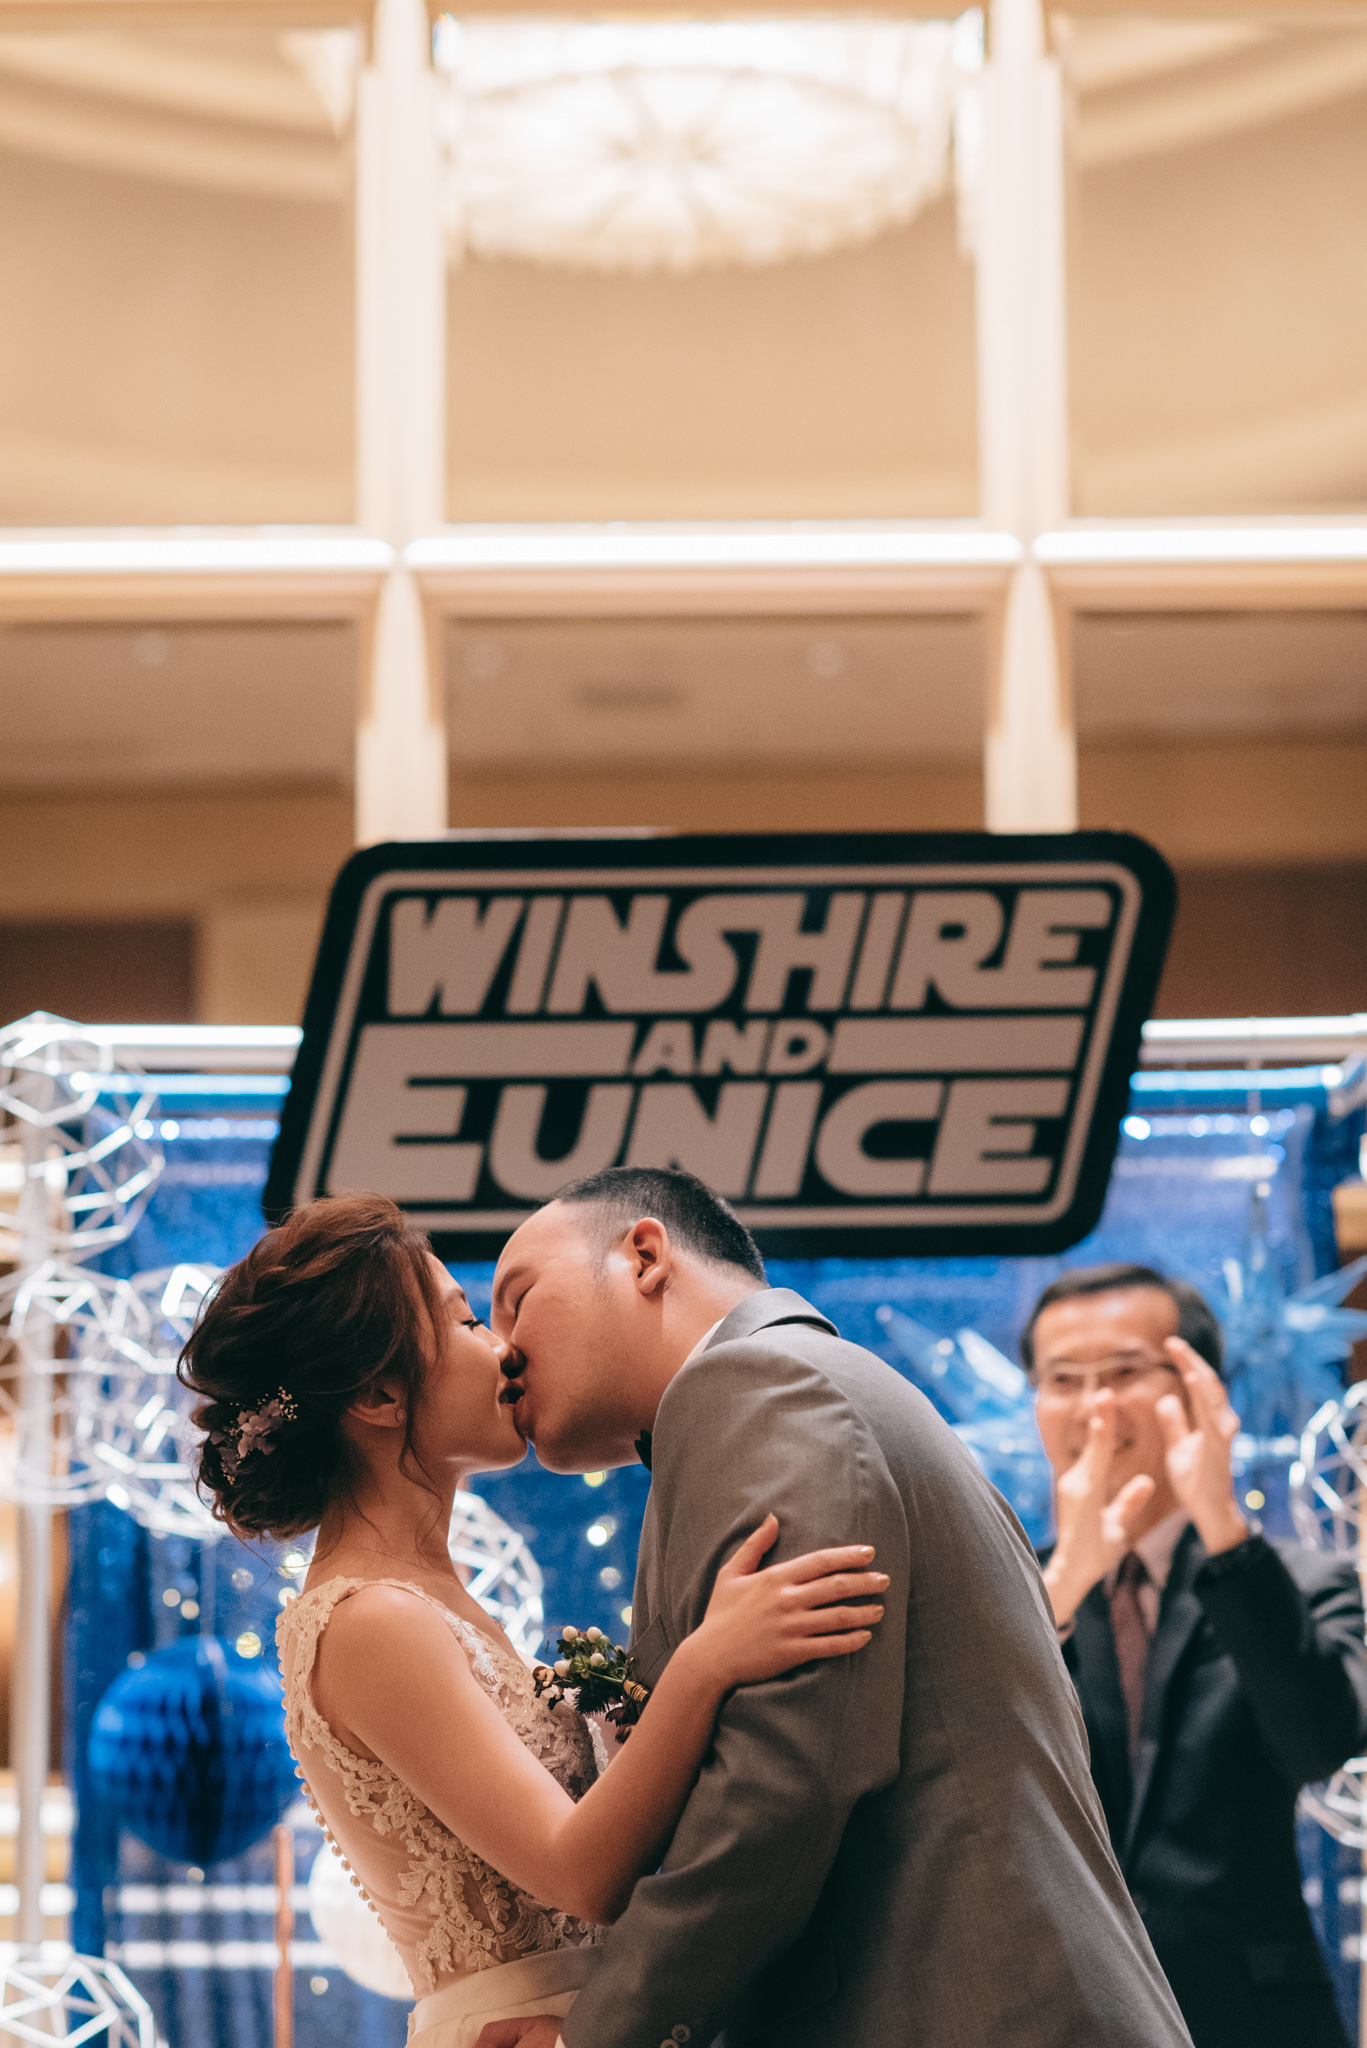 Eunice & Winshire Wedding Day Highlights (resized for sharing) - 149.jpg